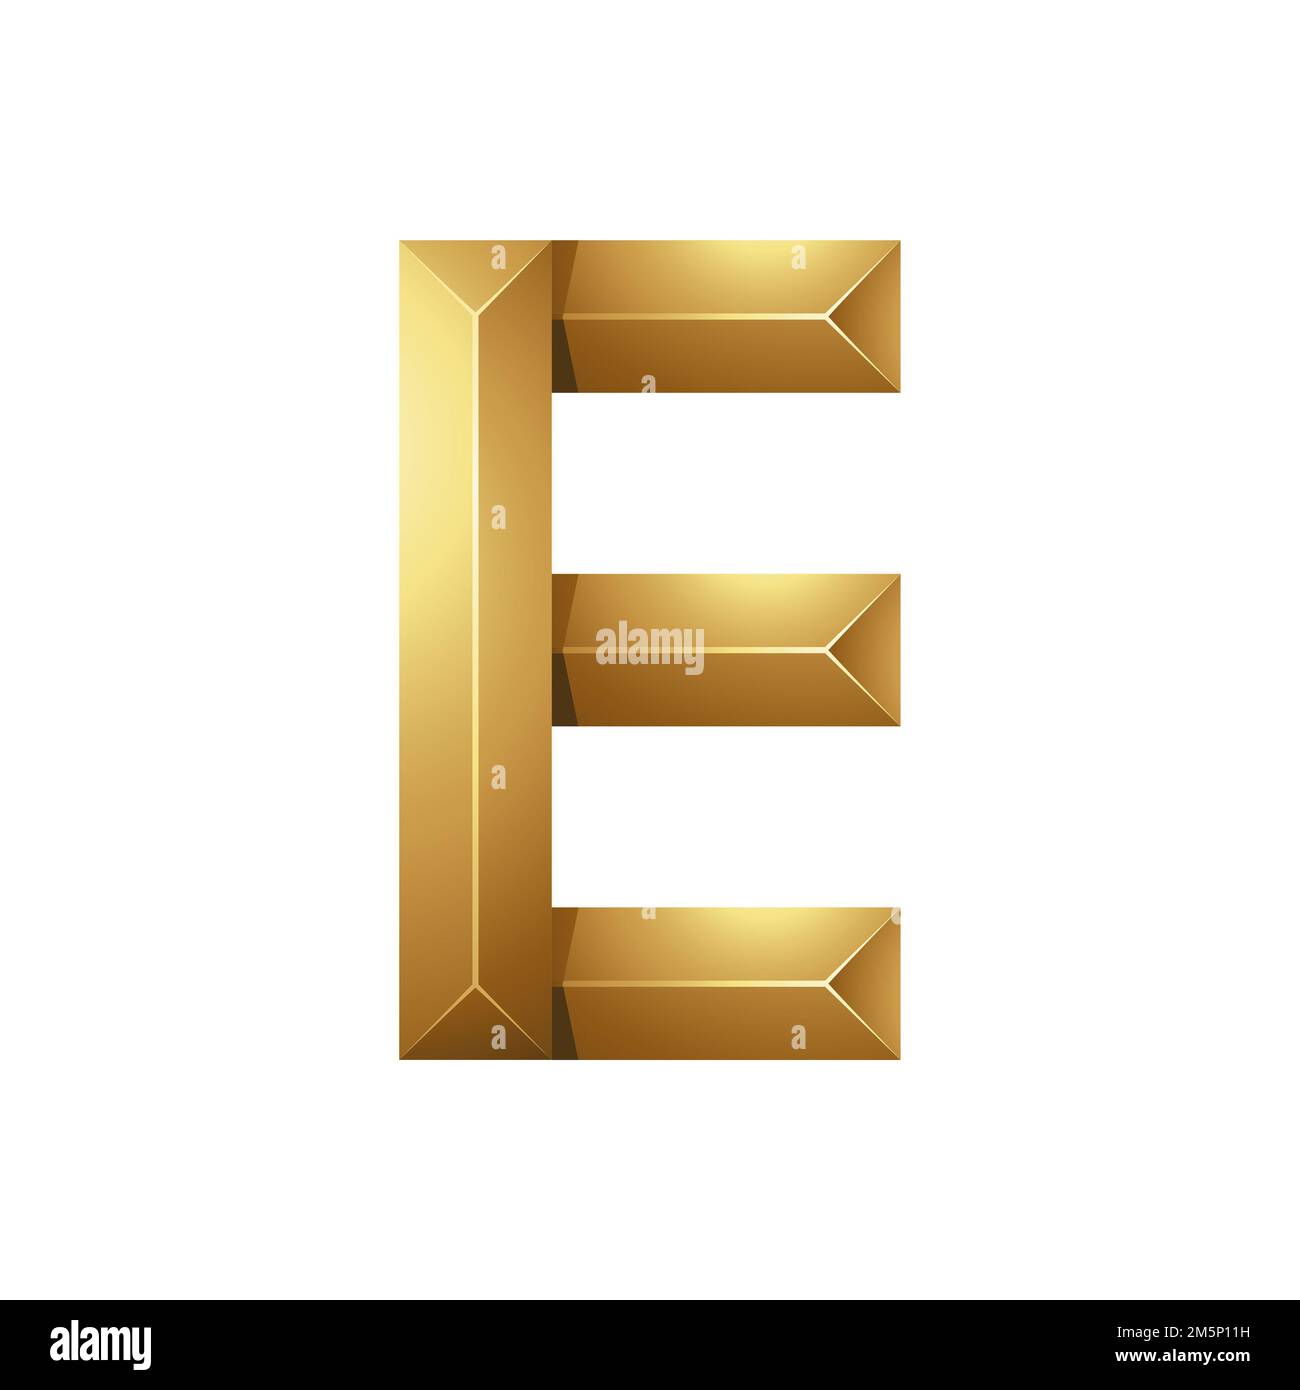 Golden Letter E Made of Pyramidical Rectangles on a White Background Stock Photo